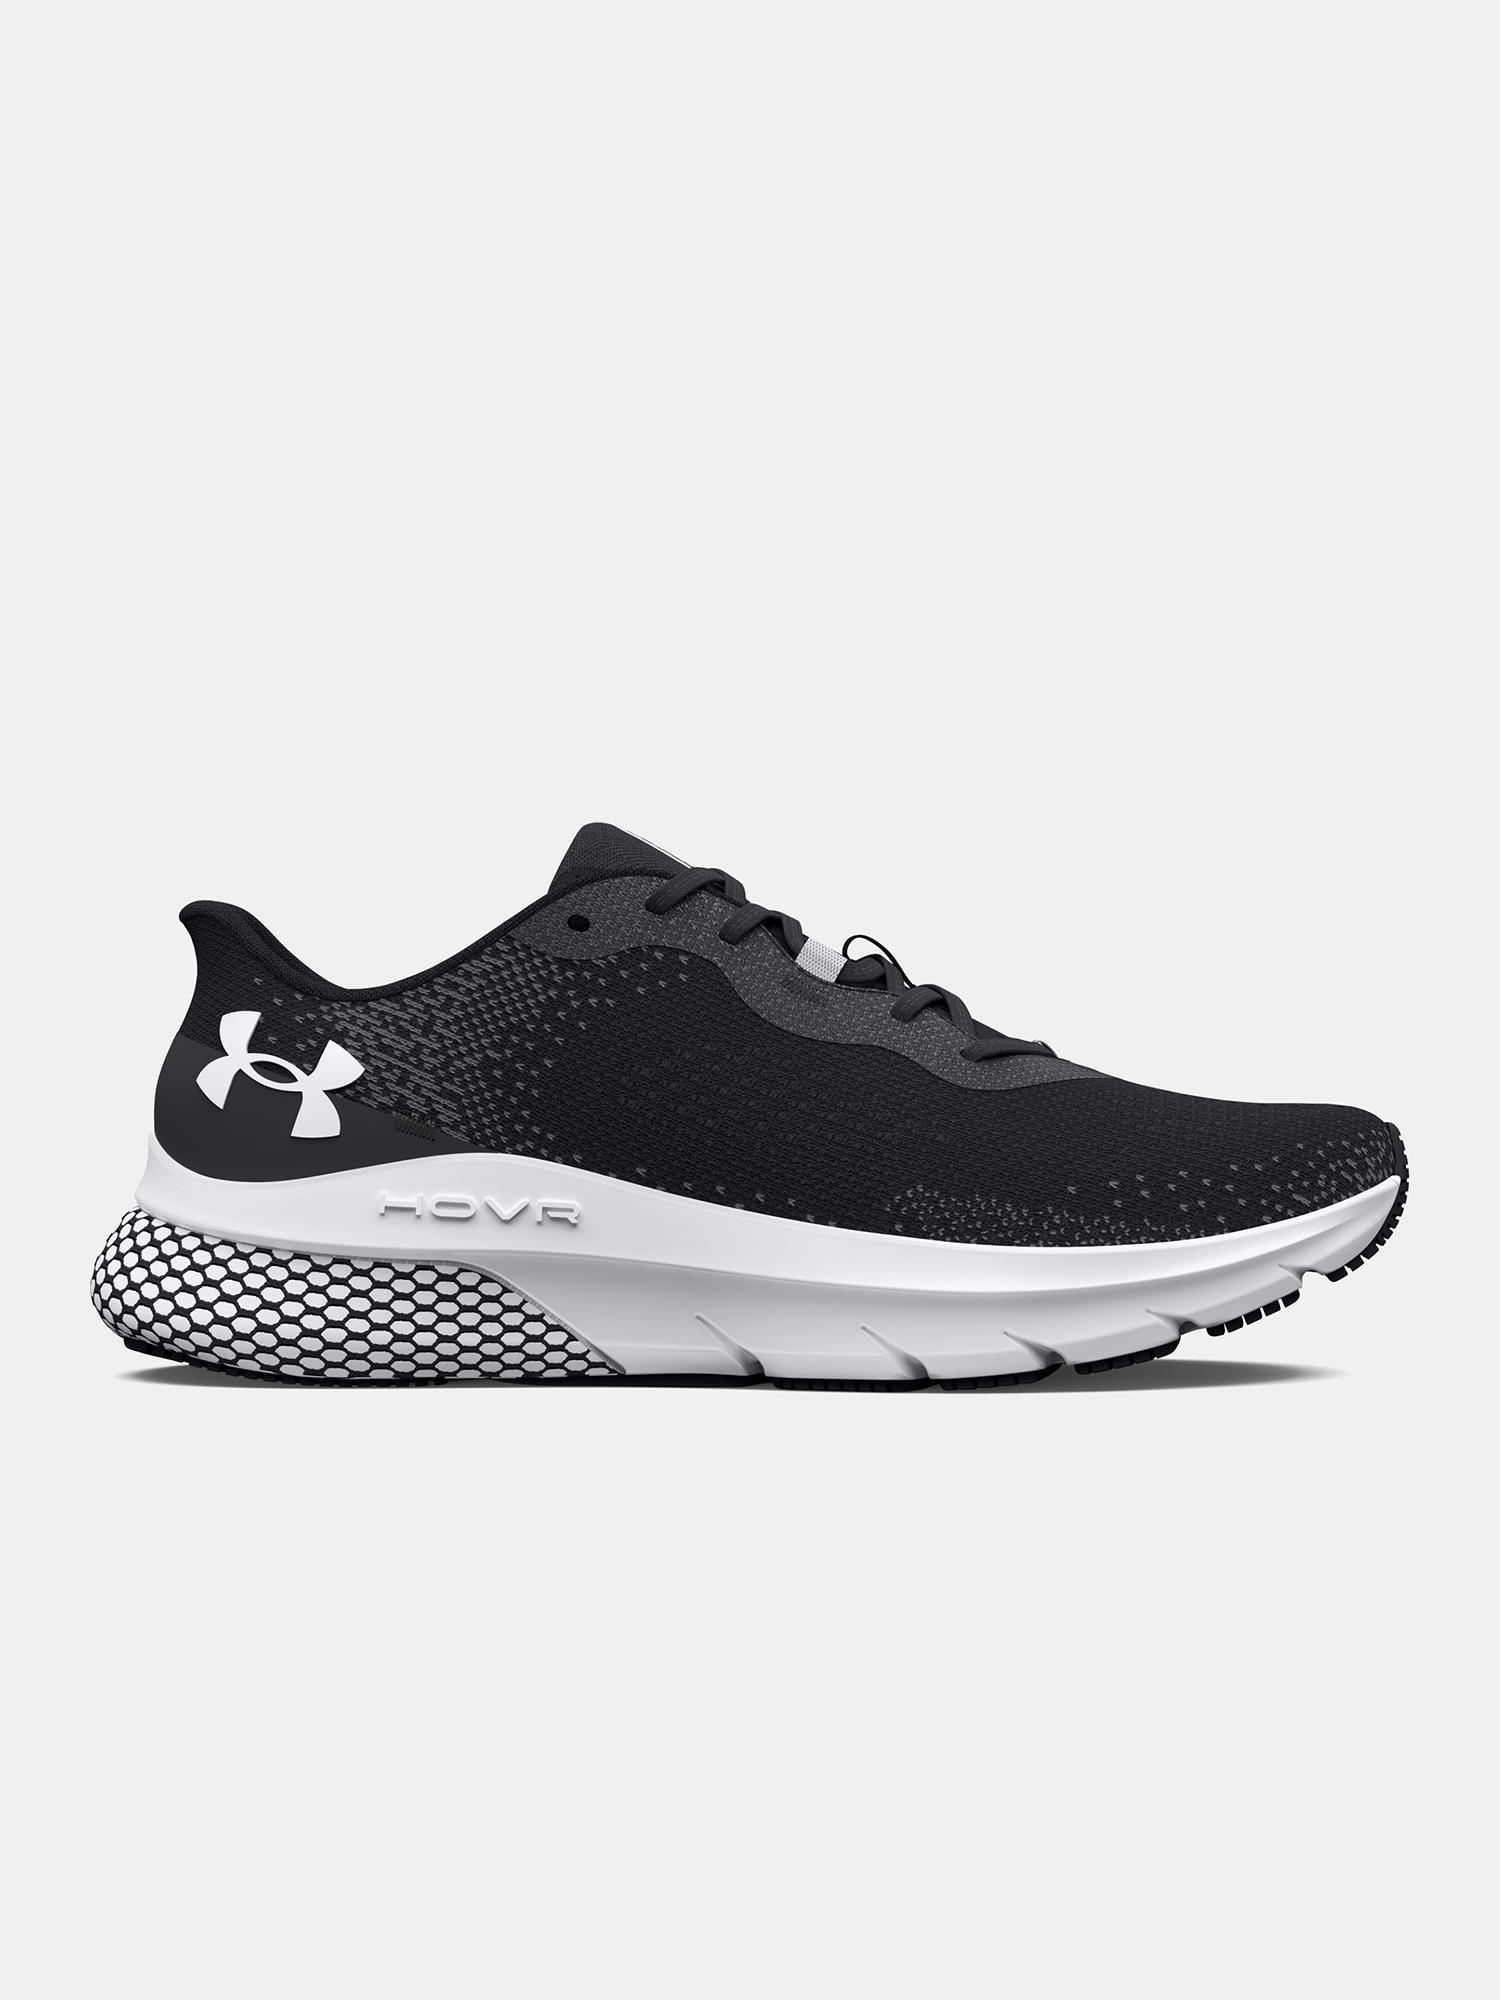 Under Armour Shoes UA W HOVR Turbulence 2-BLK - Women